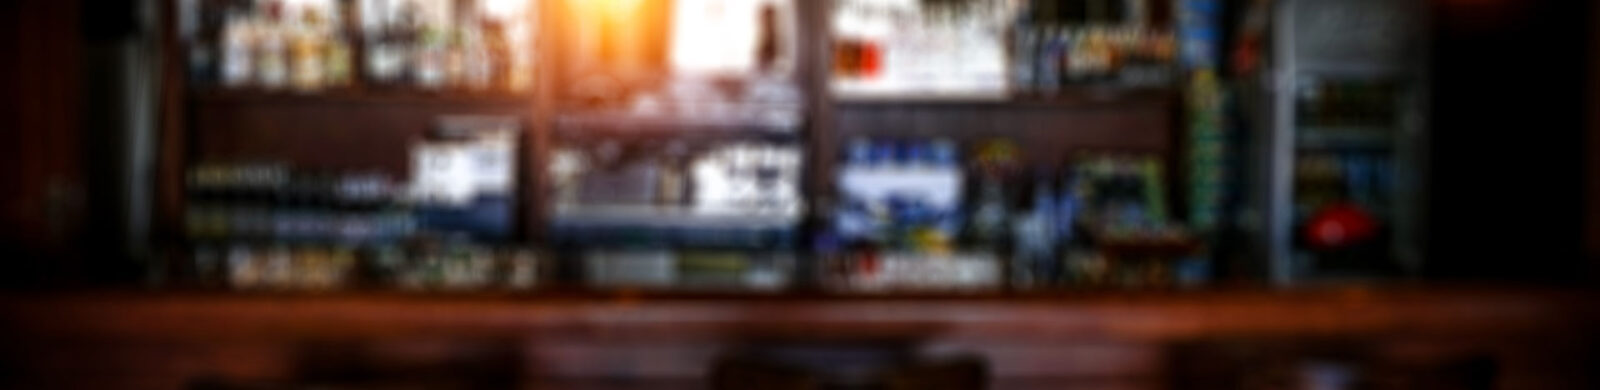 blurry bar counter with alcohol in background